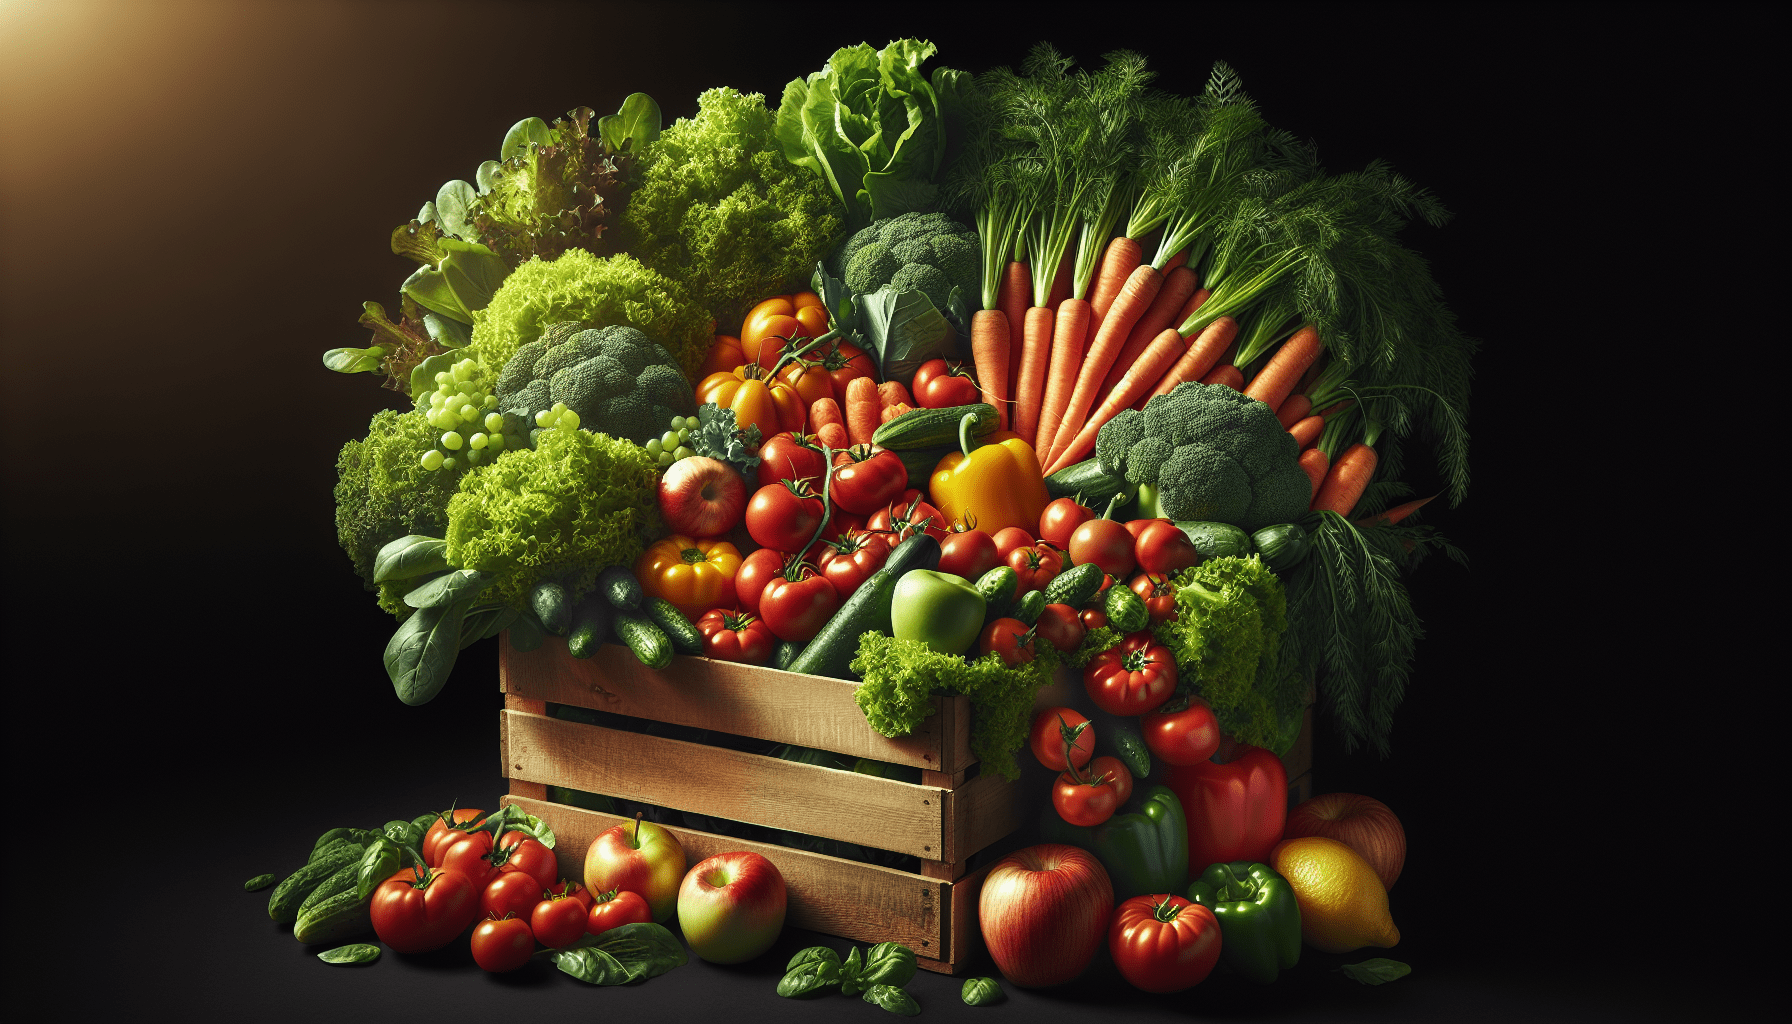 Is Organic Food Healthier Than Conventional Food?